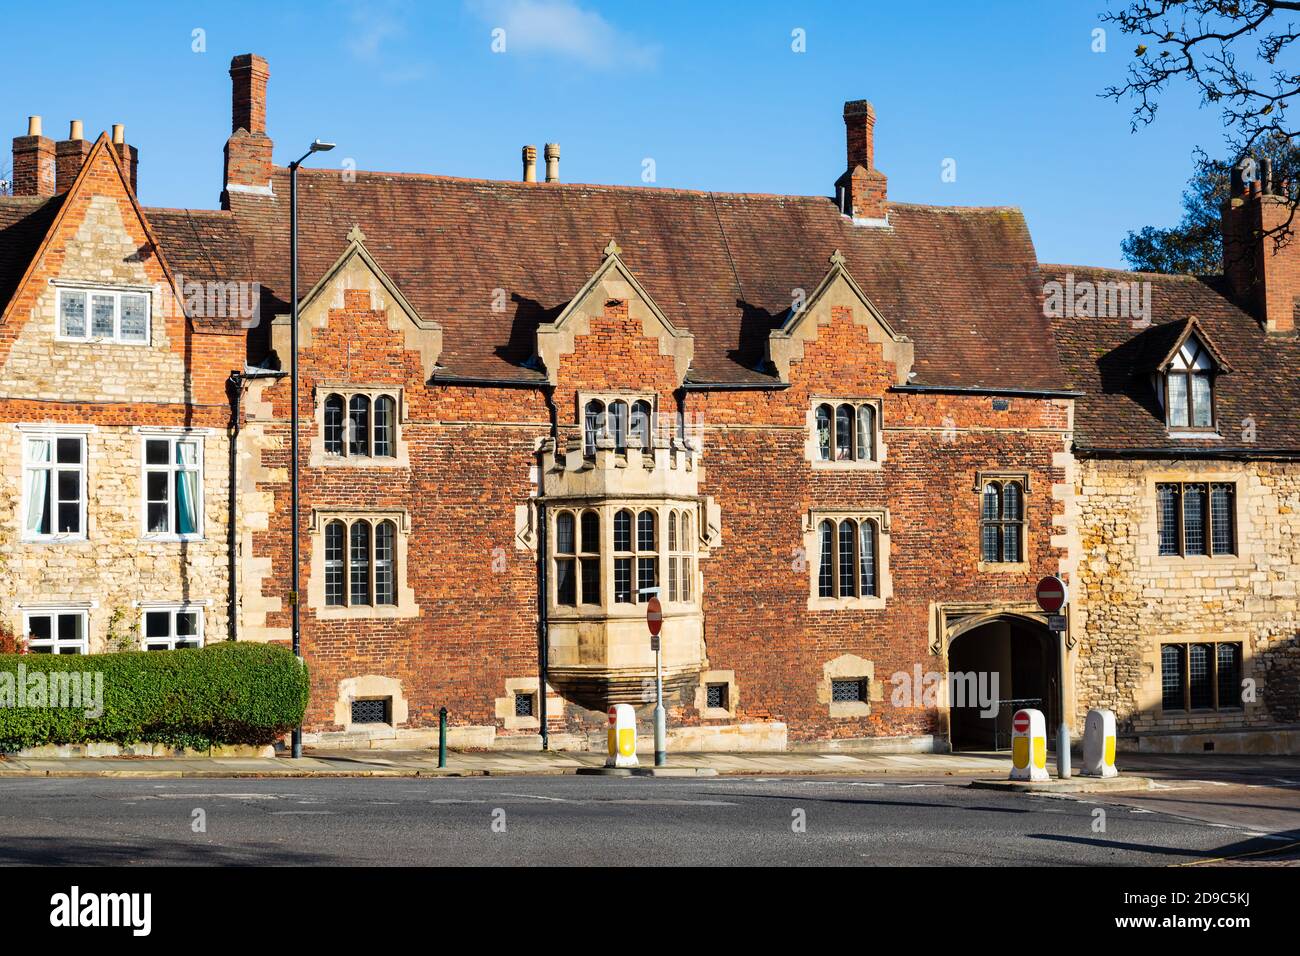 Grade 1 listed, The Chancery house, Minster Yard, Pottergate, Lincoln, Lincolnshire, England, United Kingdom. Stock Photo